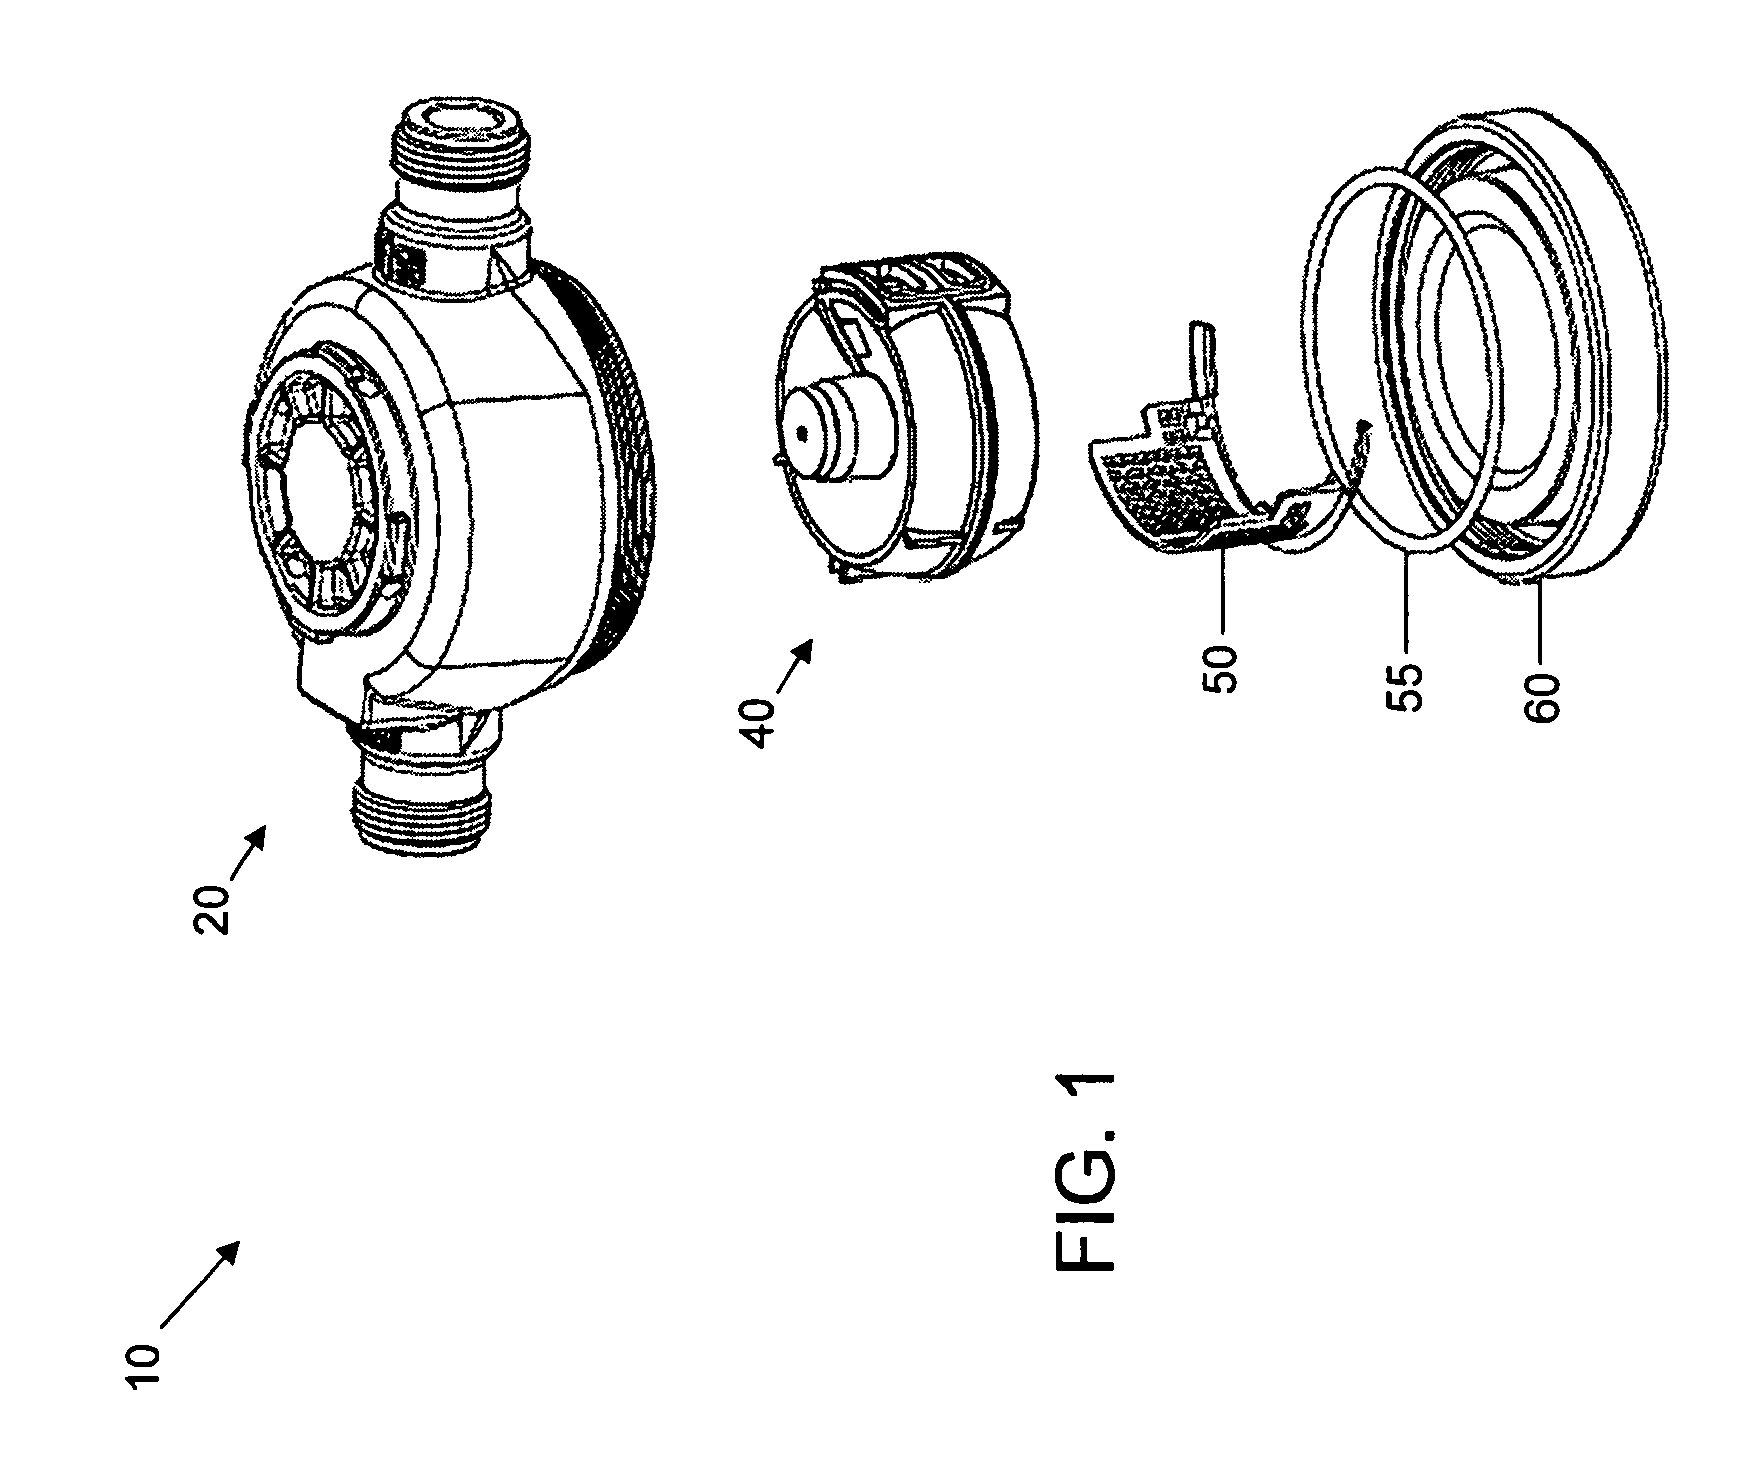 Plastic water meter with metal threads